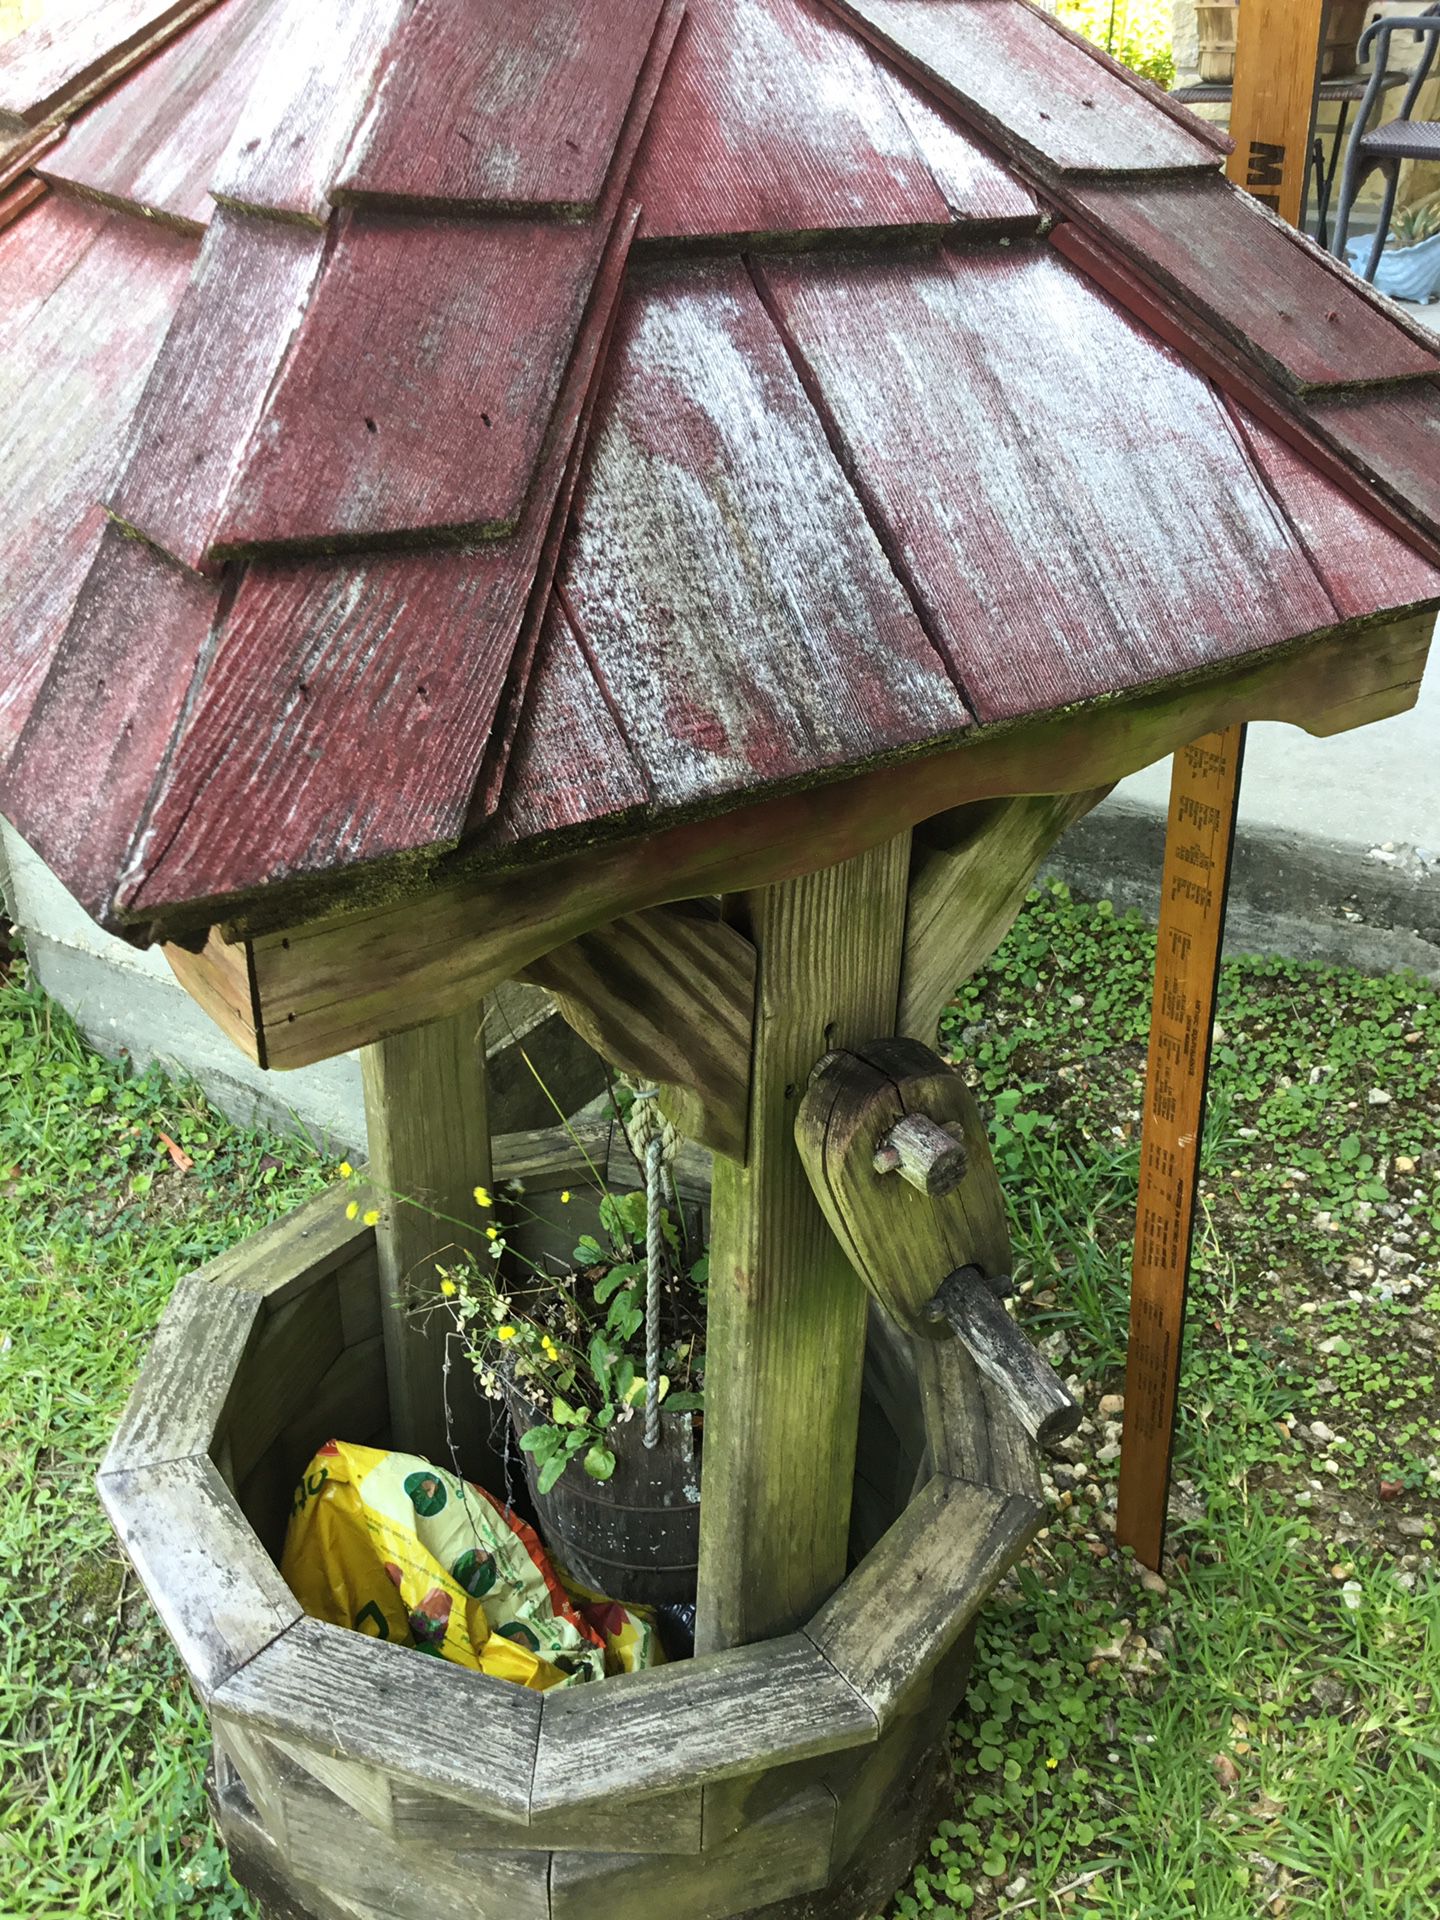 VTG HANDMADE~~~ “WISHING WELL GARDEN PLANTER” ~~ over 3ft tall by 2ft wide at highest point...HEAVY...TURN HANDLE/FLOWER POT SOLD “ASIS’